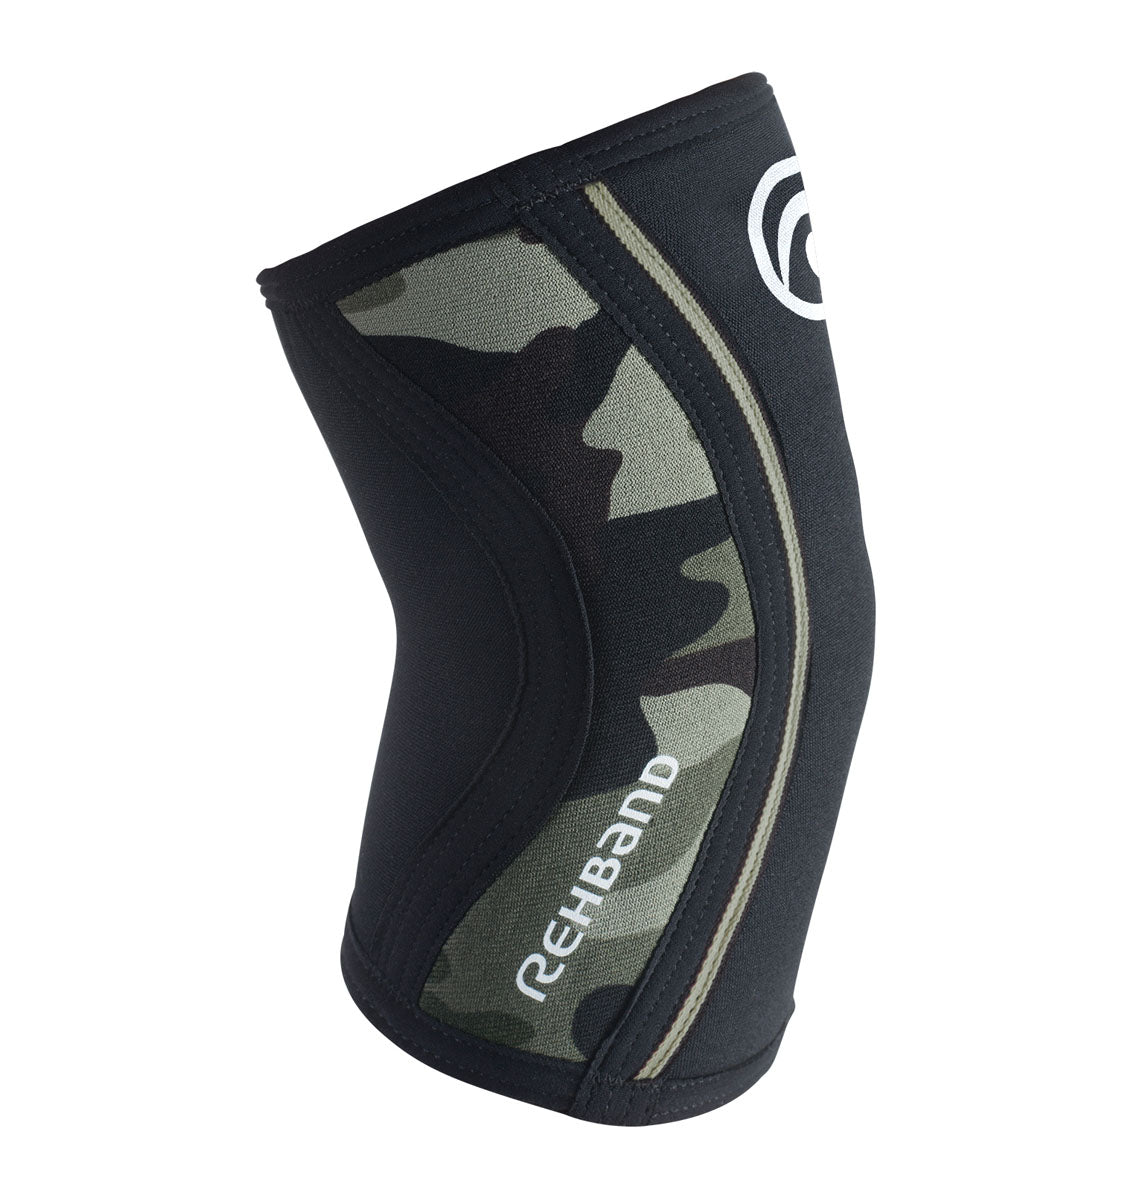 102331 - Rehband Rx Elbow Sleeve - Camo - 5mm - Side